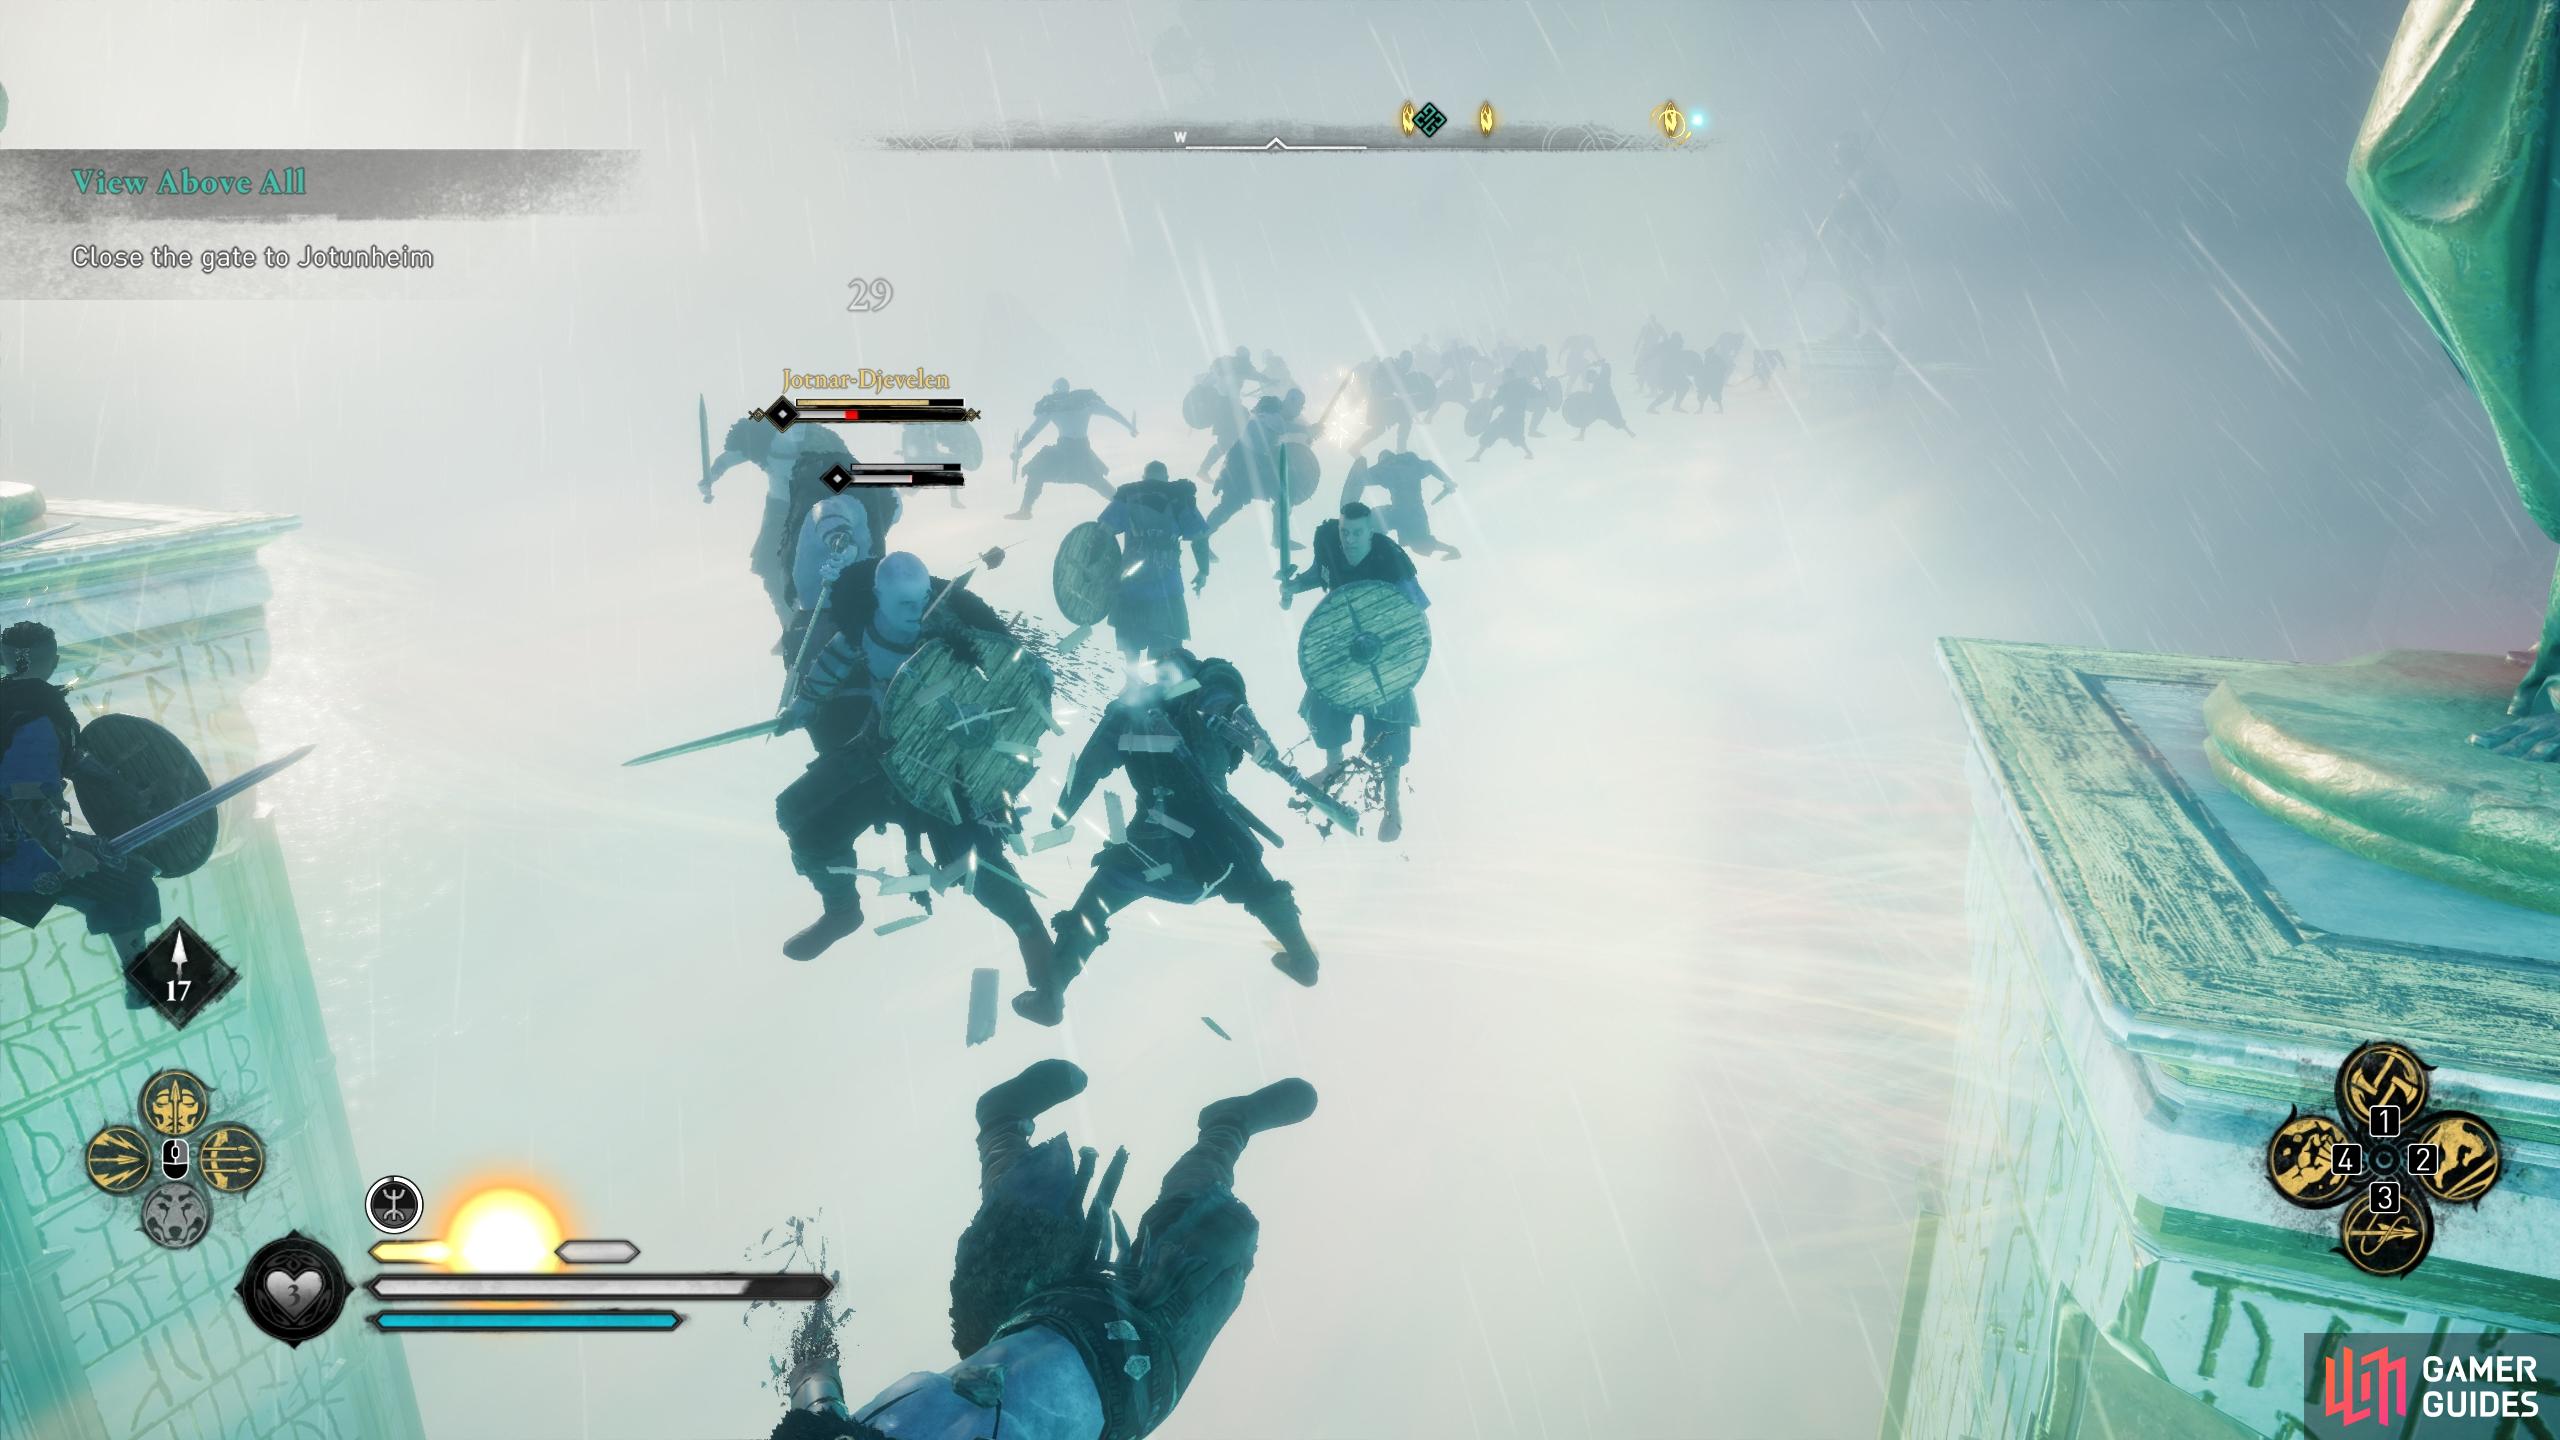 You can fight as many giants as you want on the bridge, but you main goal is to reach Heimdall's Tower.